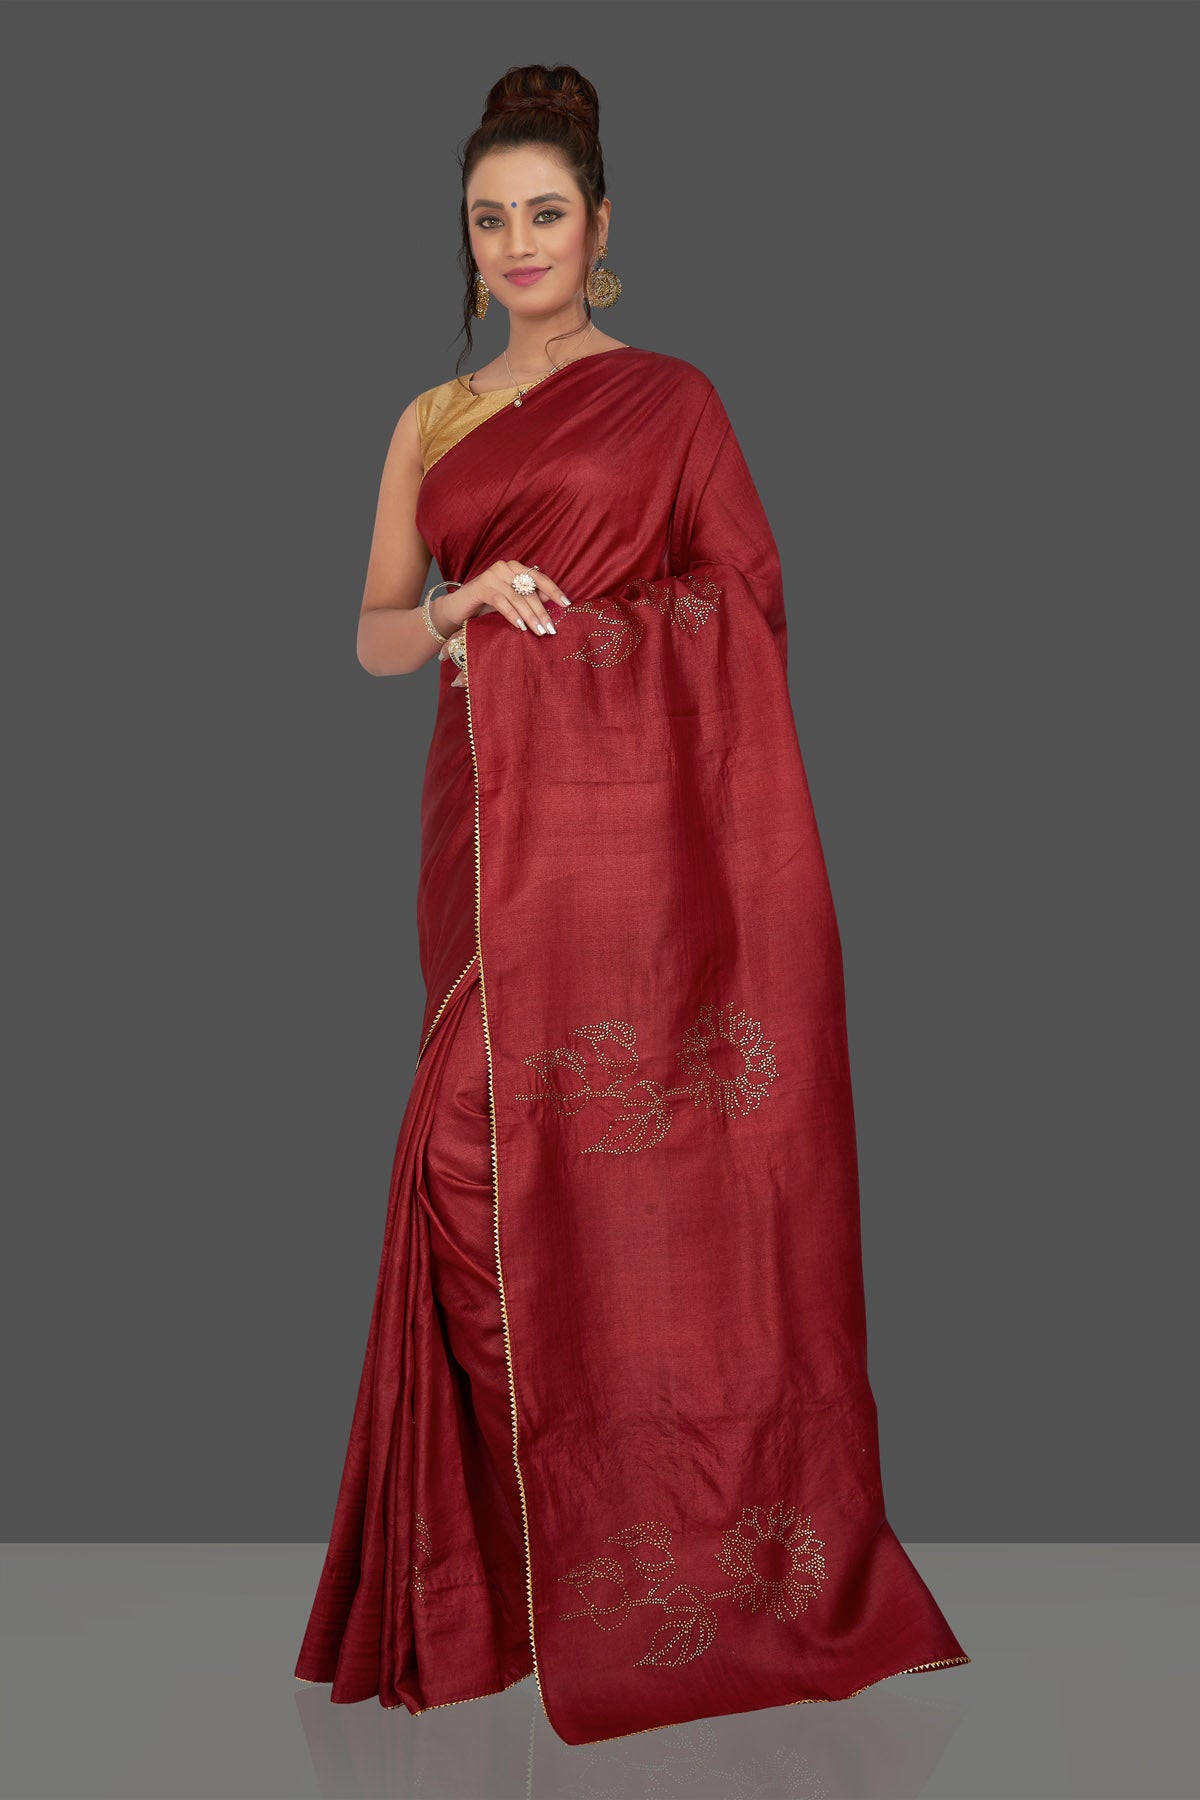 Buy gorgeous cherry red embroidered tussar silk sari online in USA. Shop for weddings and special occasions stunning tussar saris, hand embroidered saris, crepe sarees, designer sarees in USA from Pure Elegance Indian clothing store in USA. Shop online now.-front